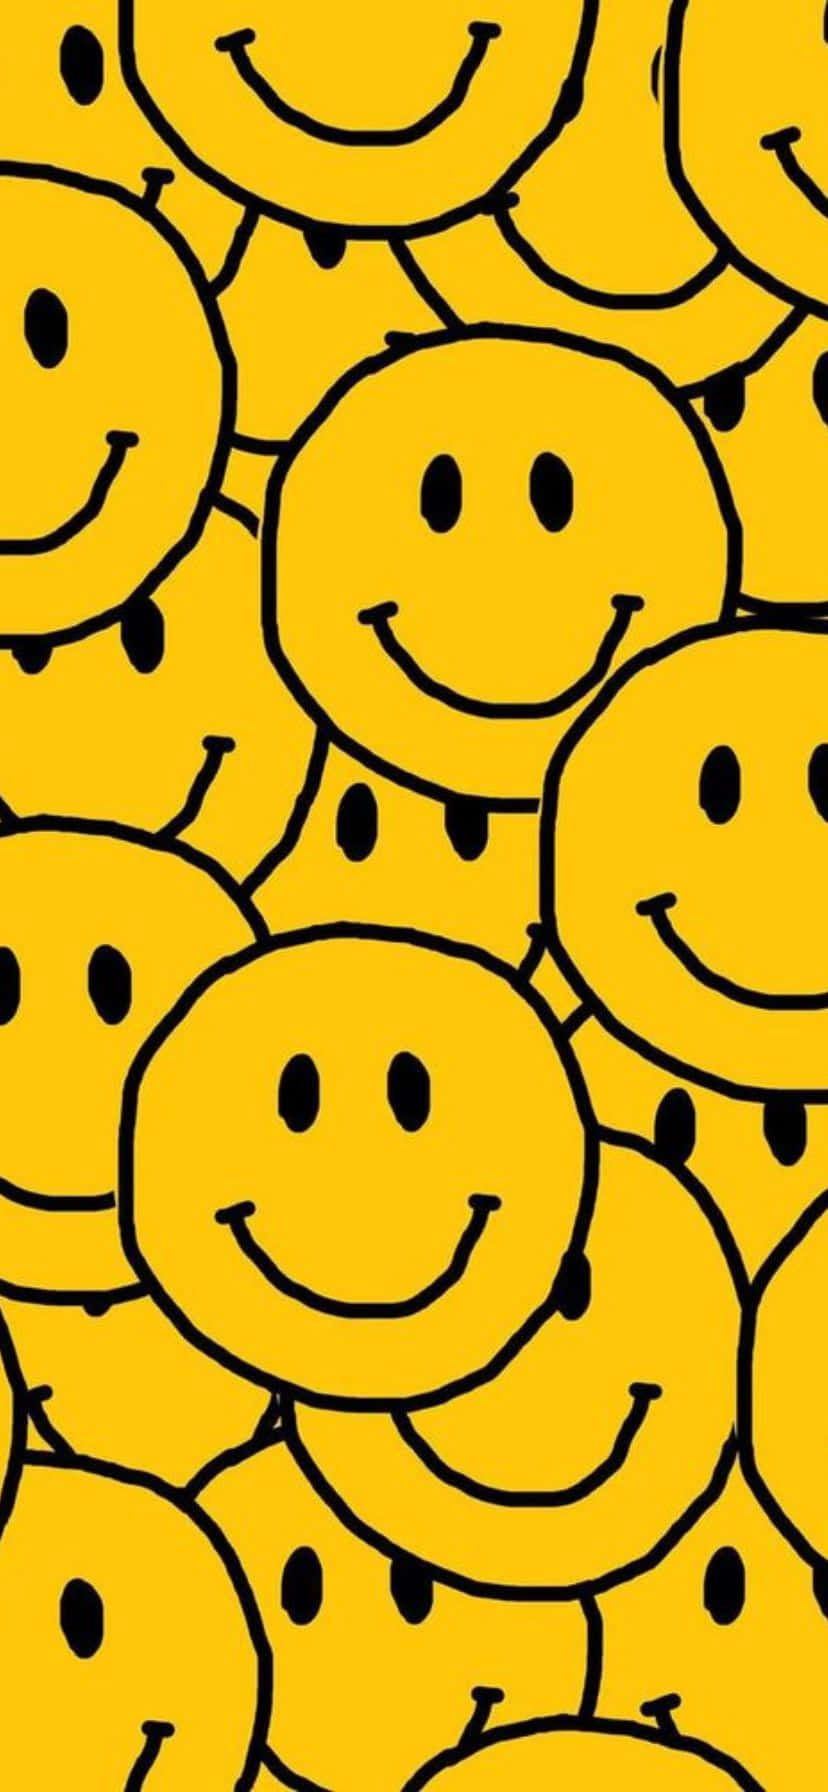 Happy Yellow Smiley Faces Pattern.jpg Wallpaper